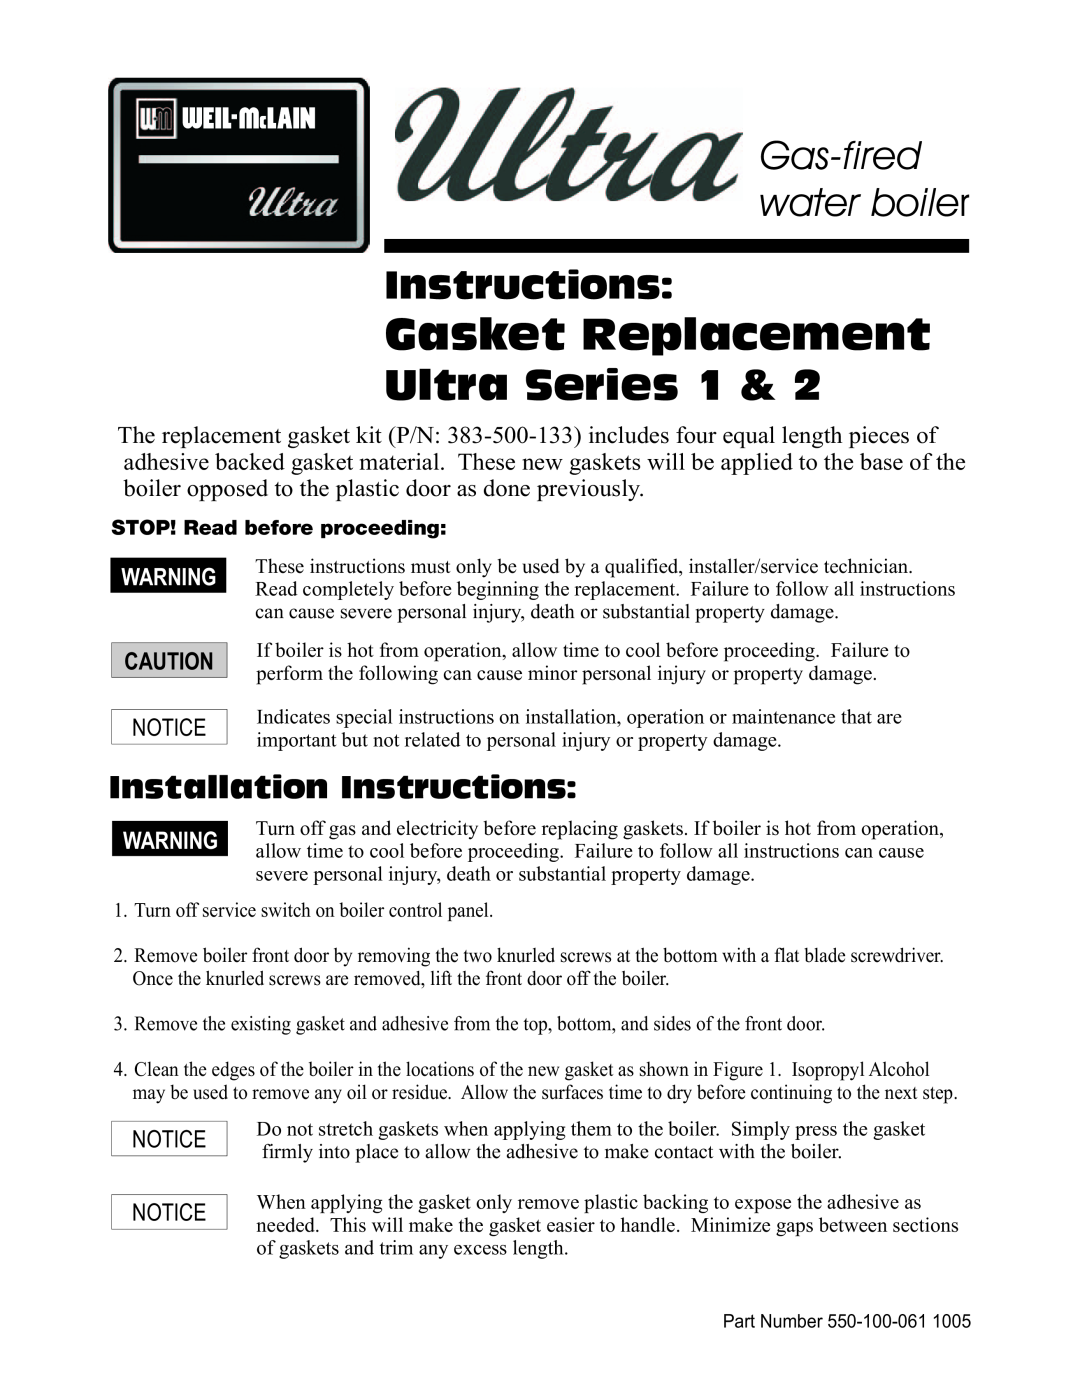 Weil-McLain Series 1 installation instructions Gasket Replacement, Ultra Series, Gas-fired water boiler, Instructions 